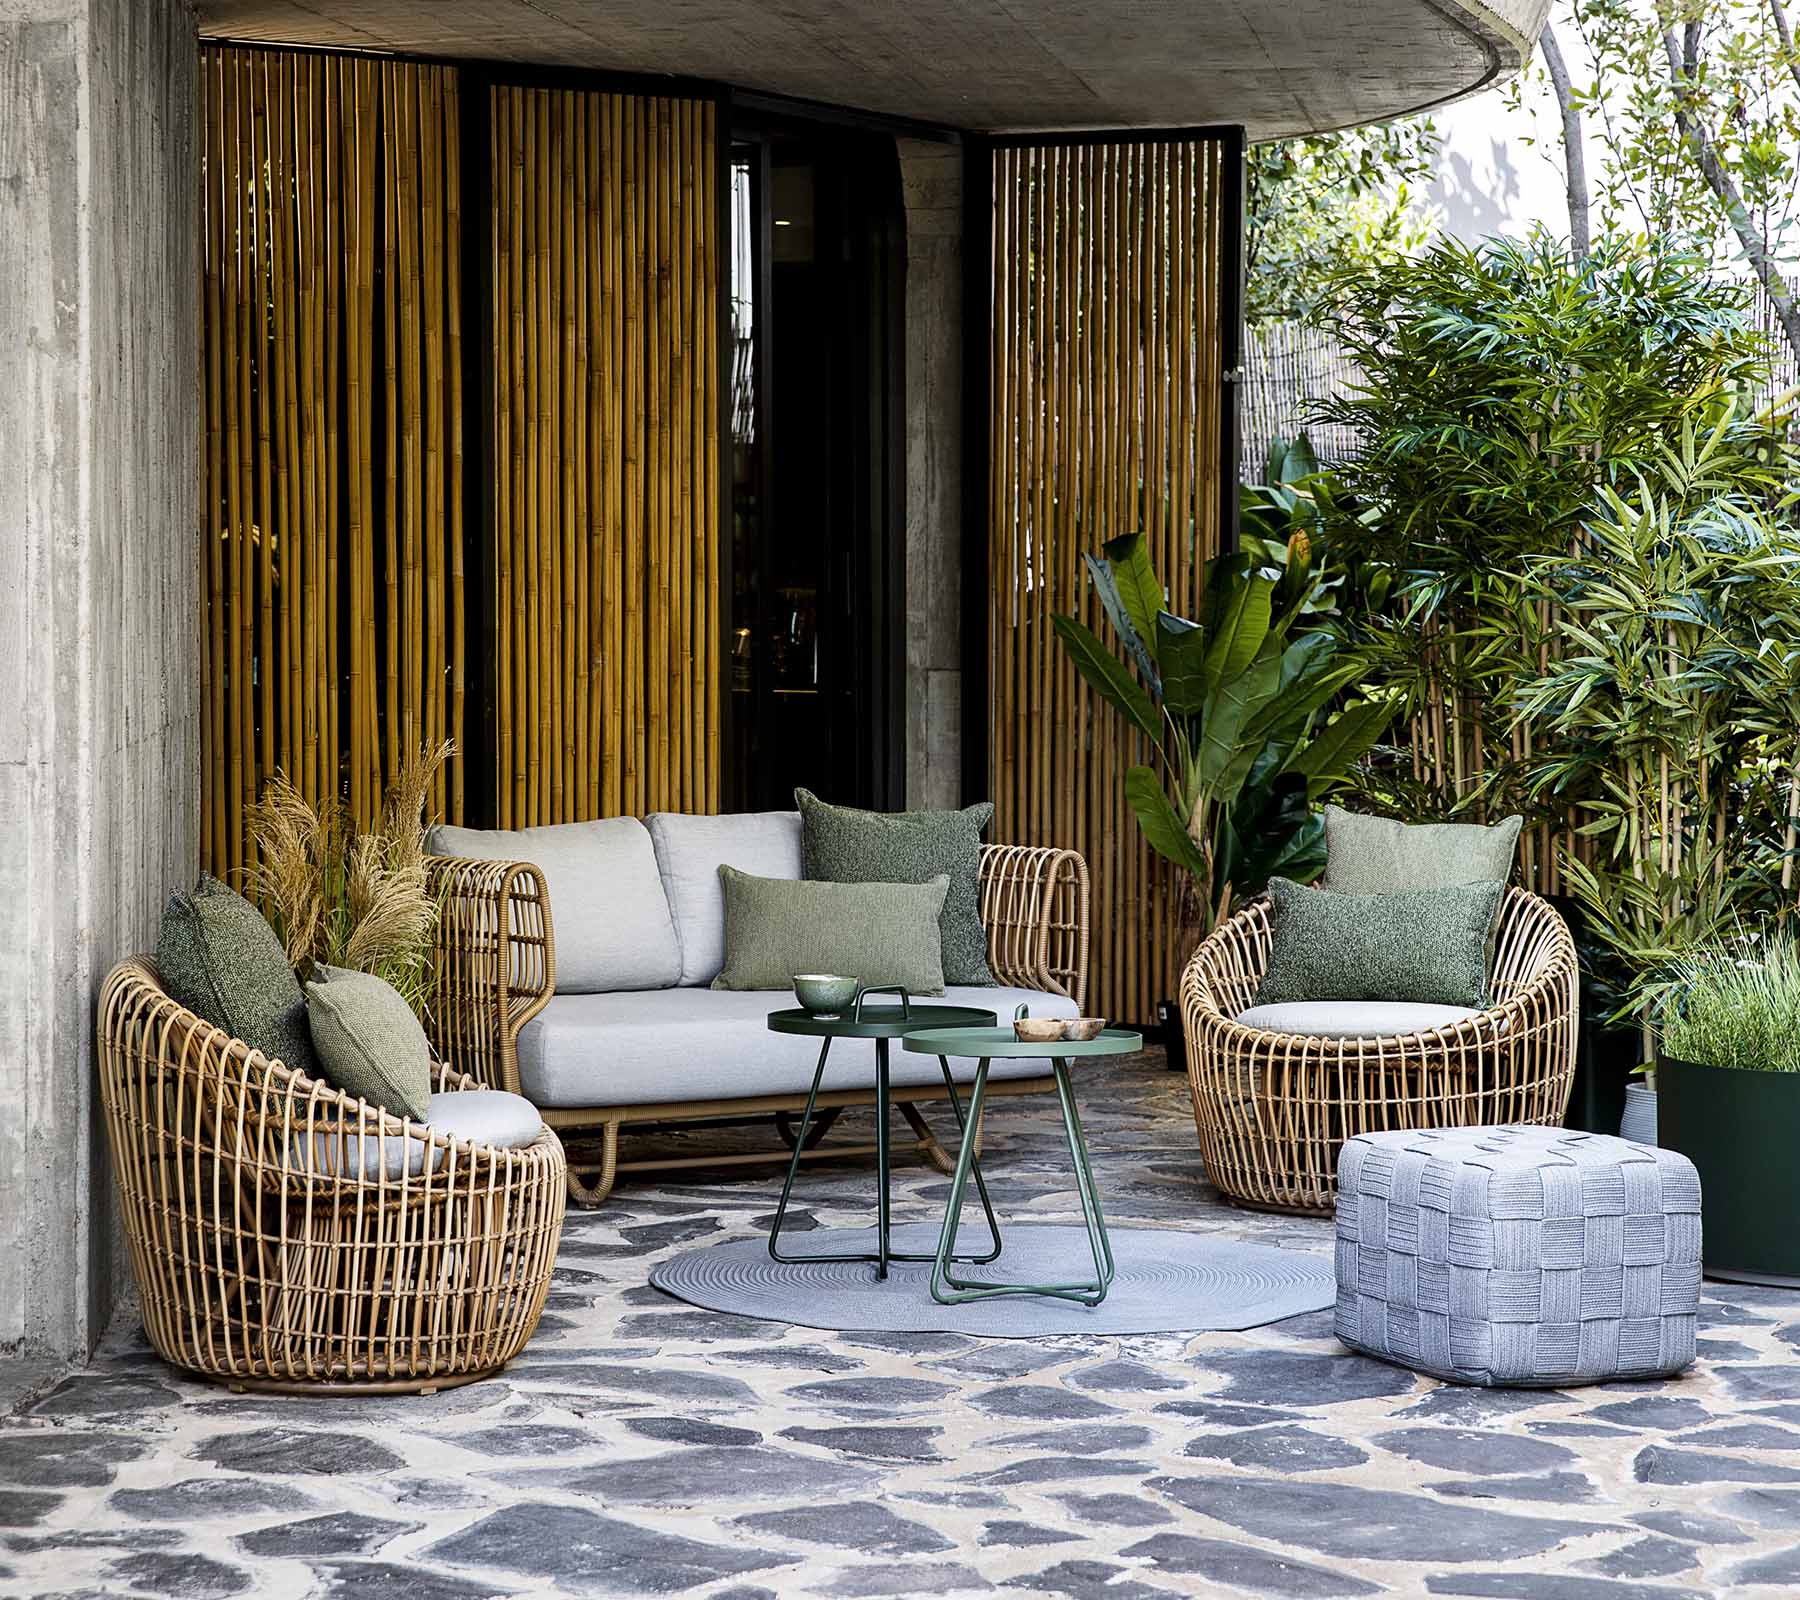 Boxhill's Nest 2-Seater Sofa lifestyle image with Nest Lounge Chair and Nest Round Rattan Chair at patio